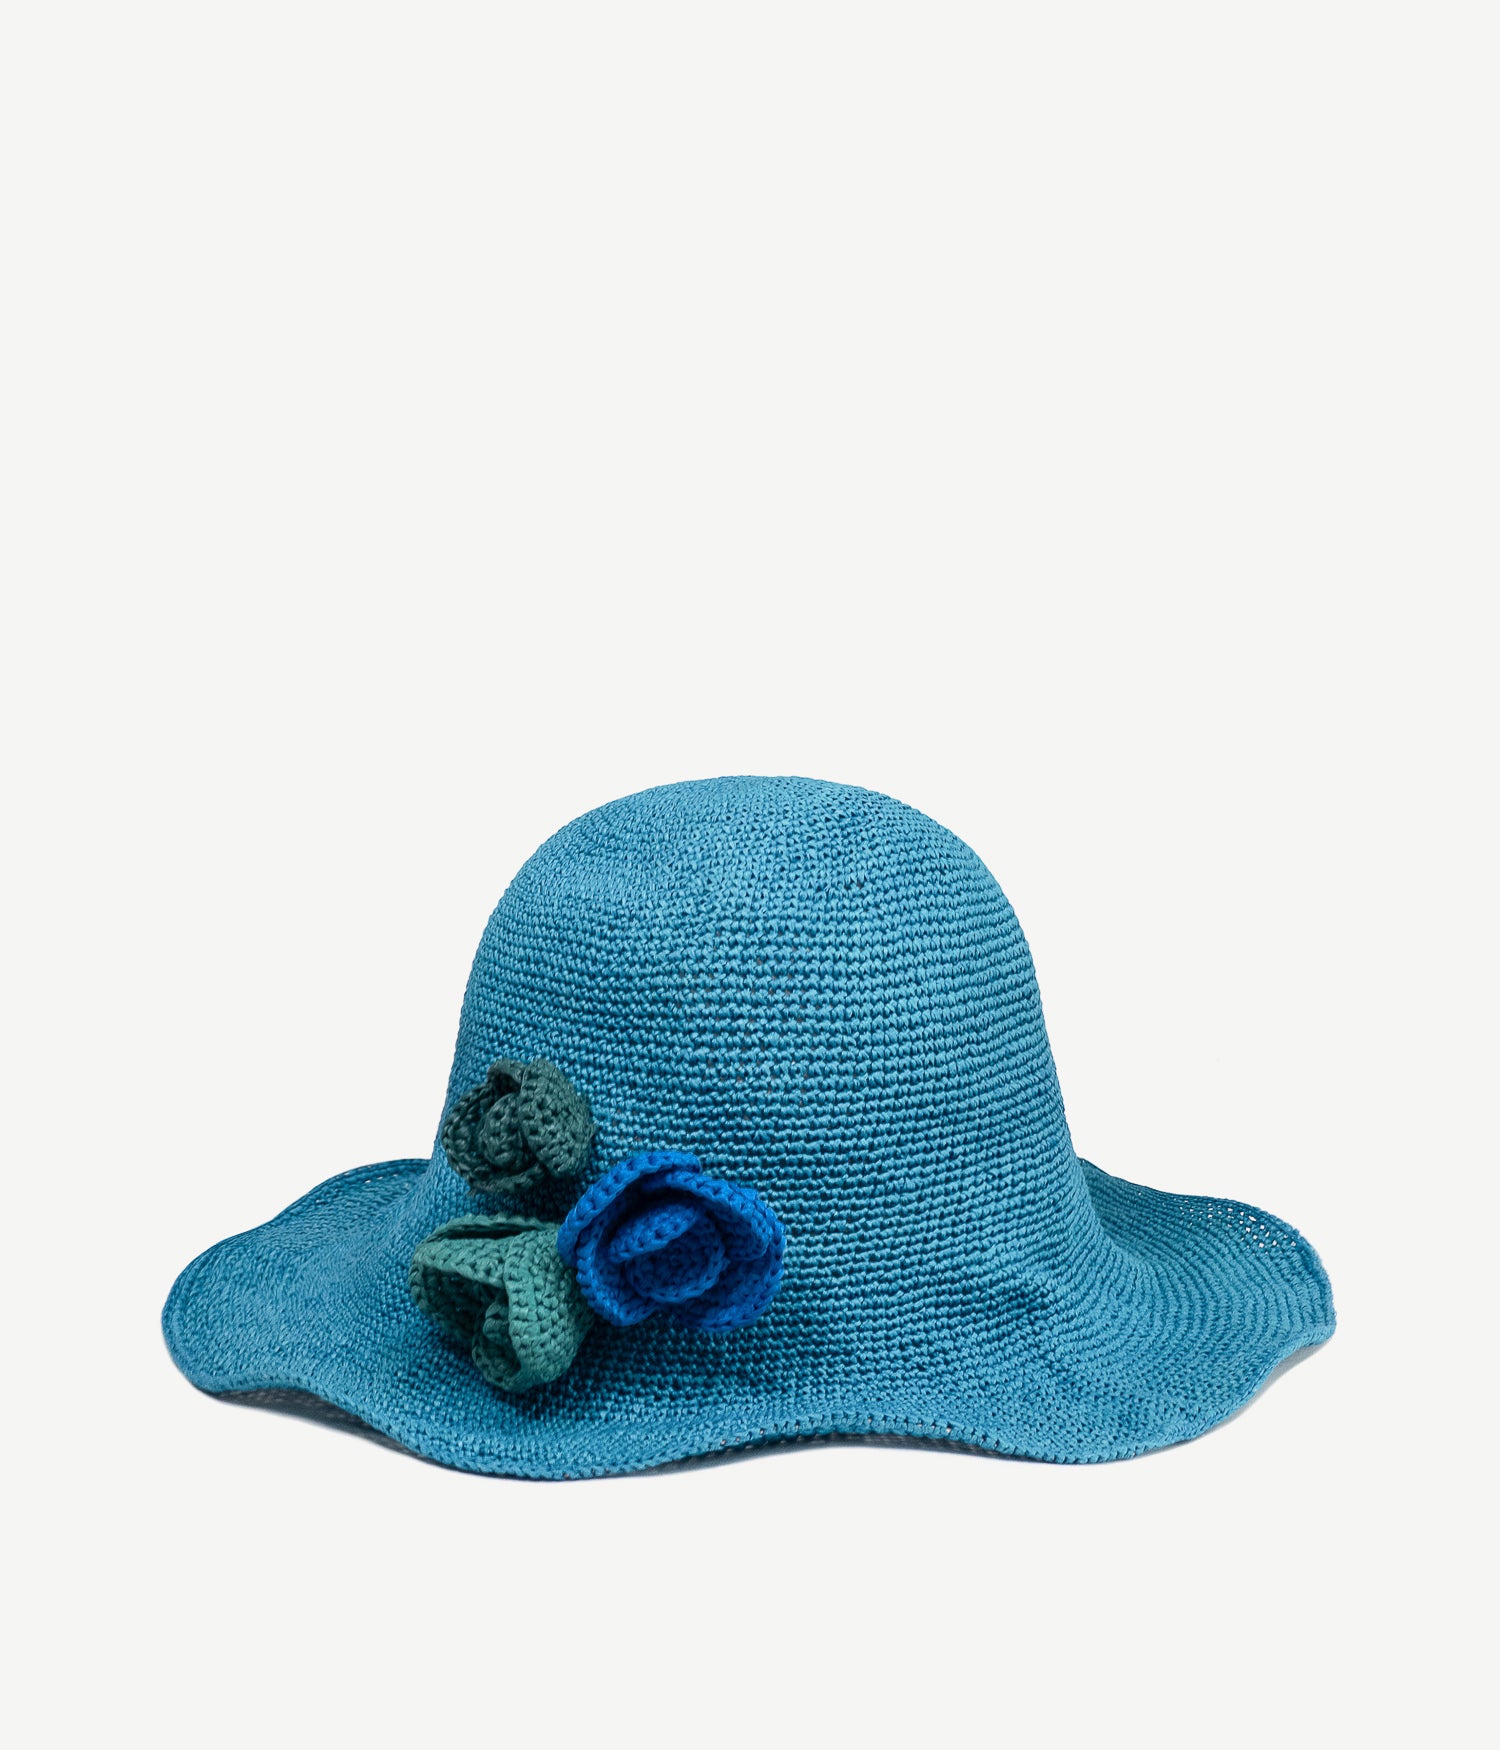 Bucket Hat Embellished with Hand-Knitted Flowers